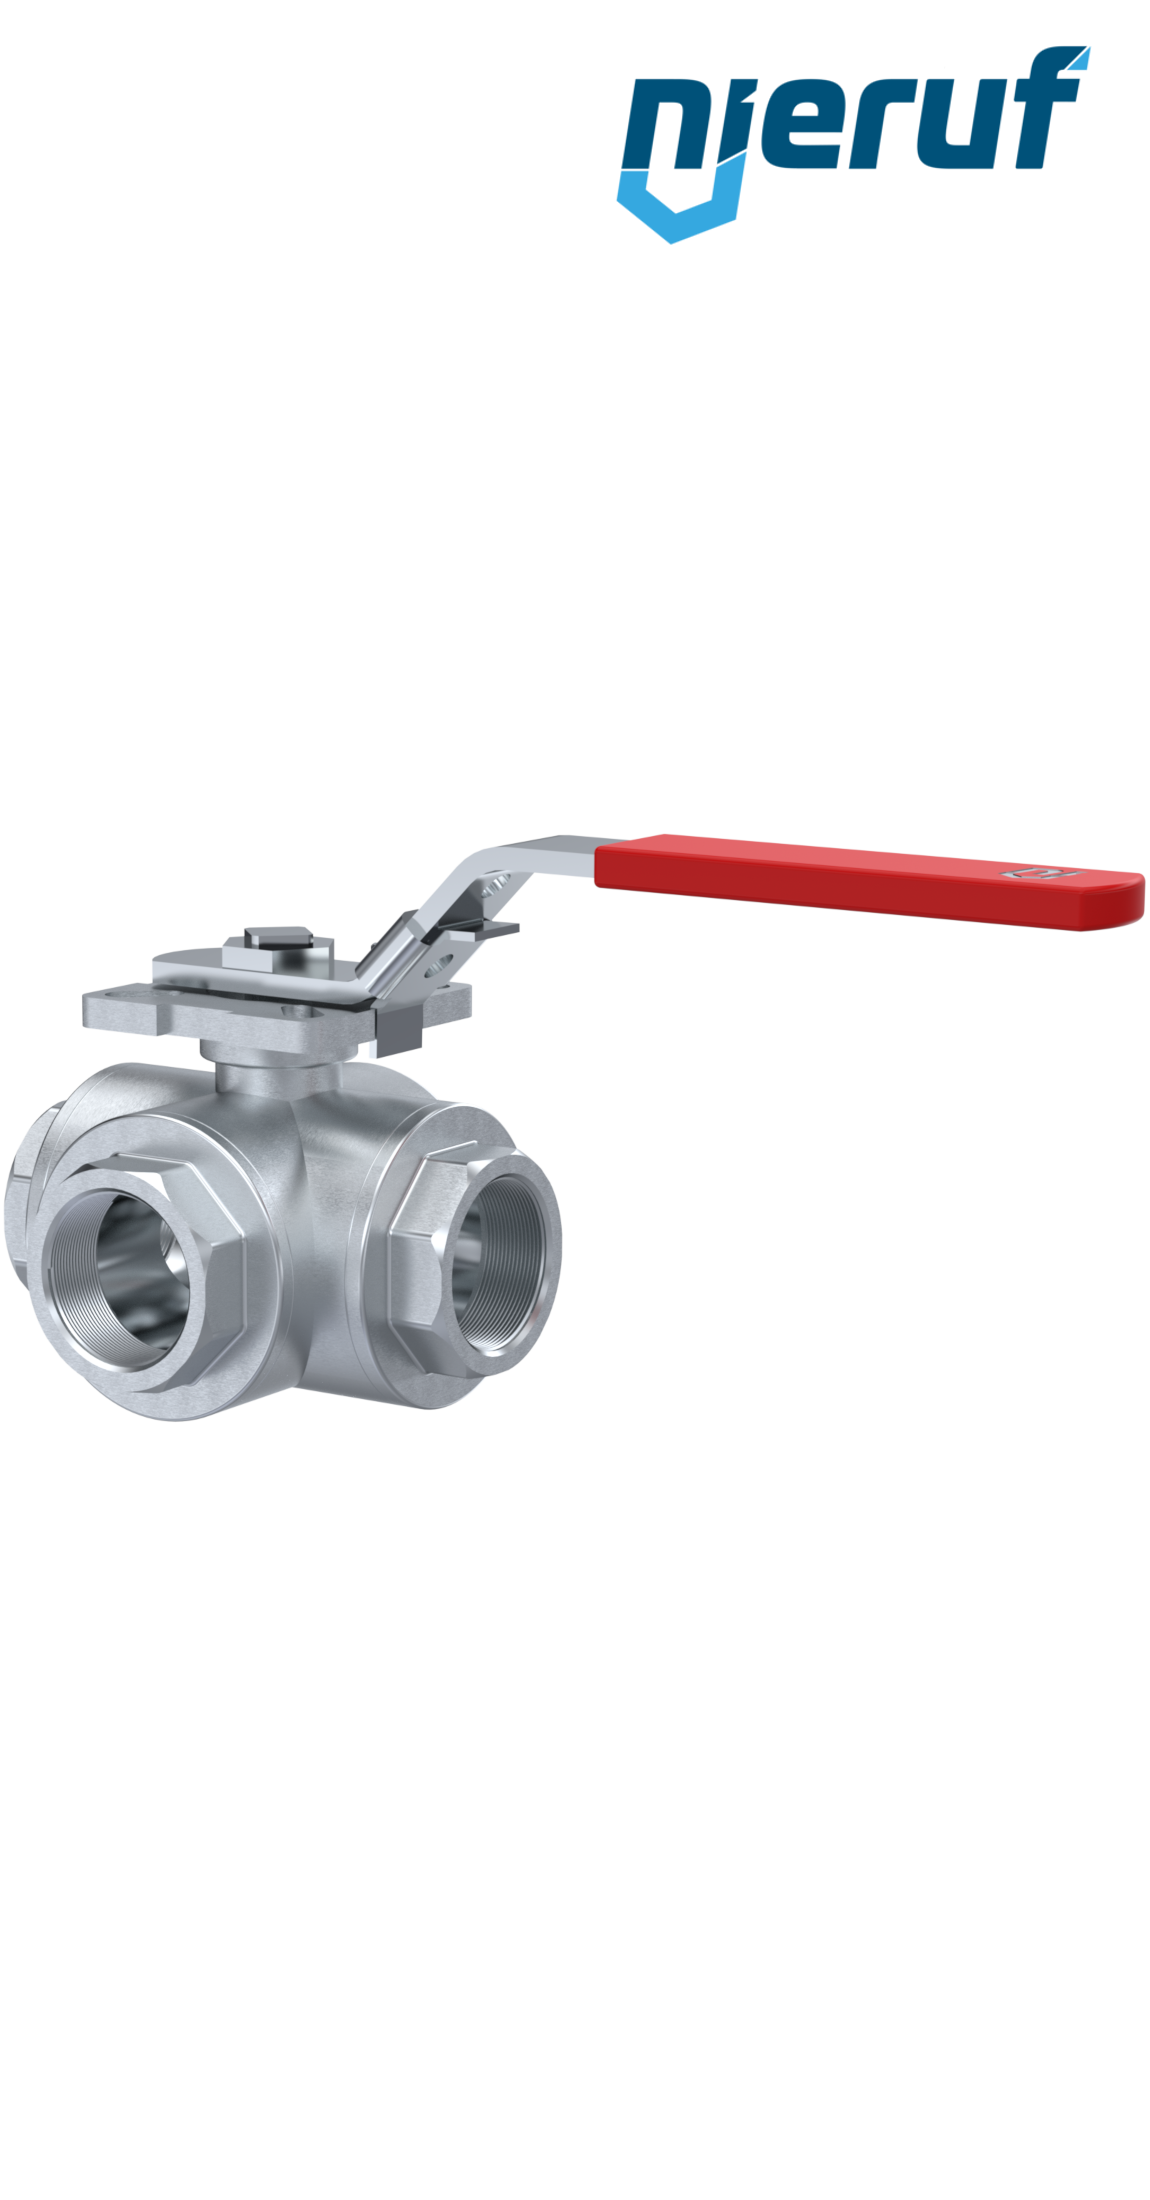 3-way ball valve DN32 - 1 1/4" inch GK09 stainless steel L drilling